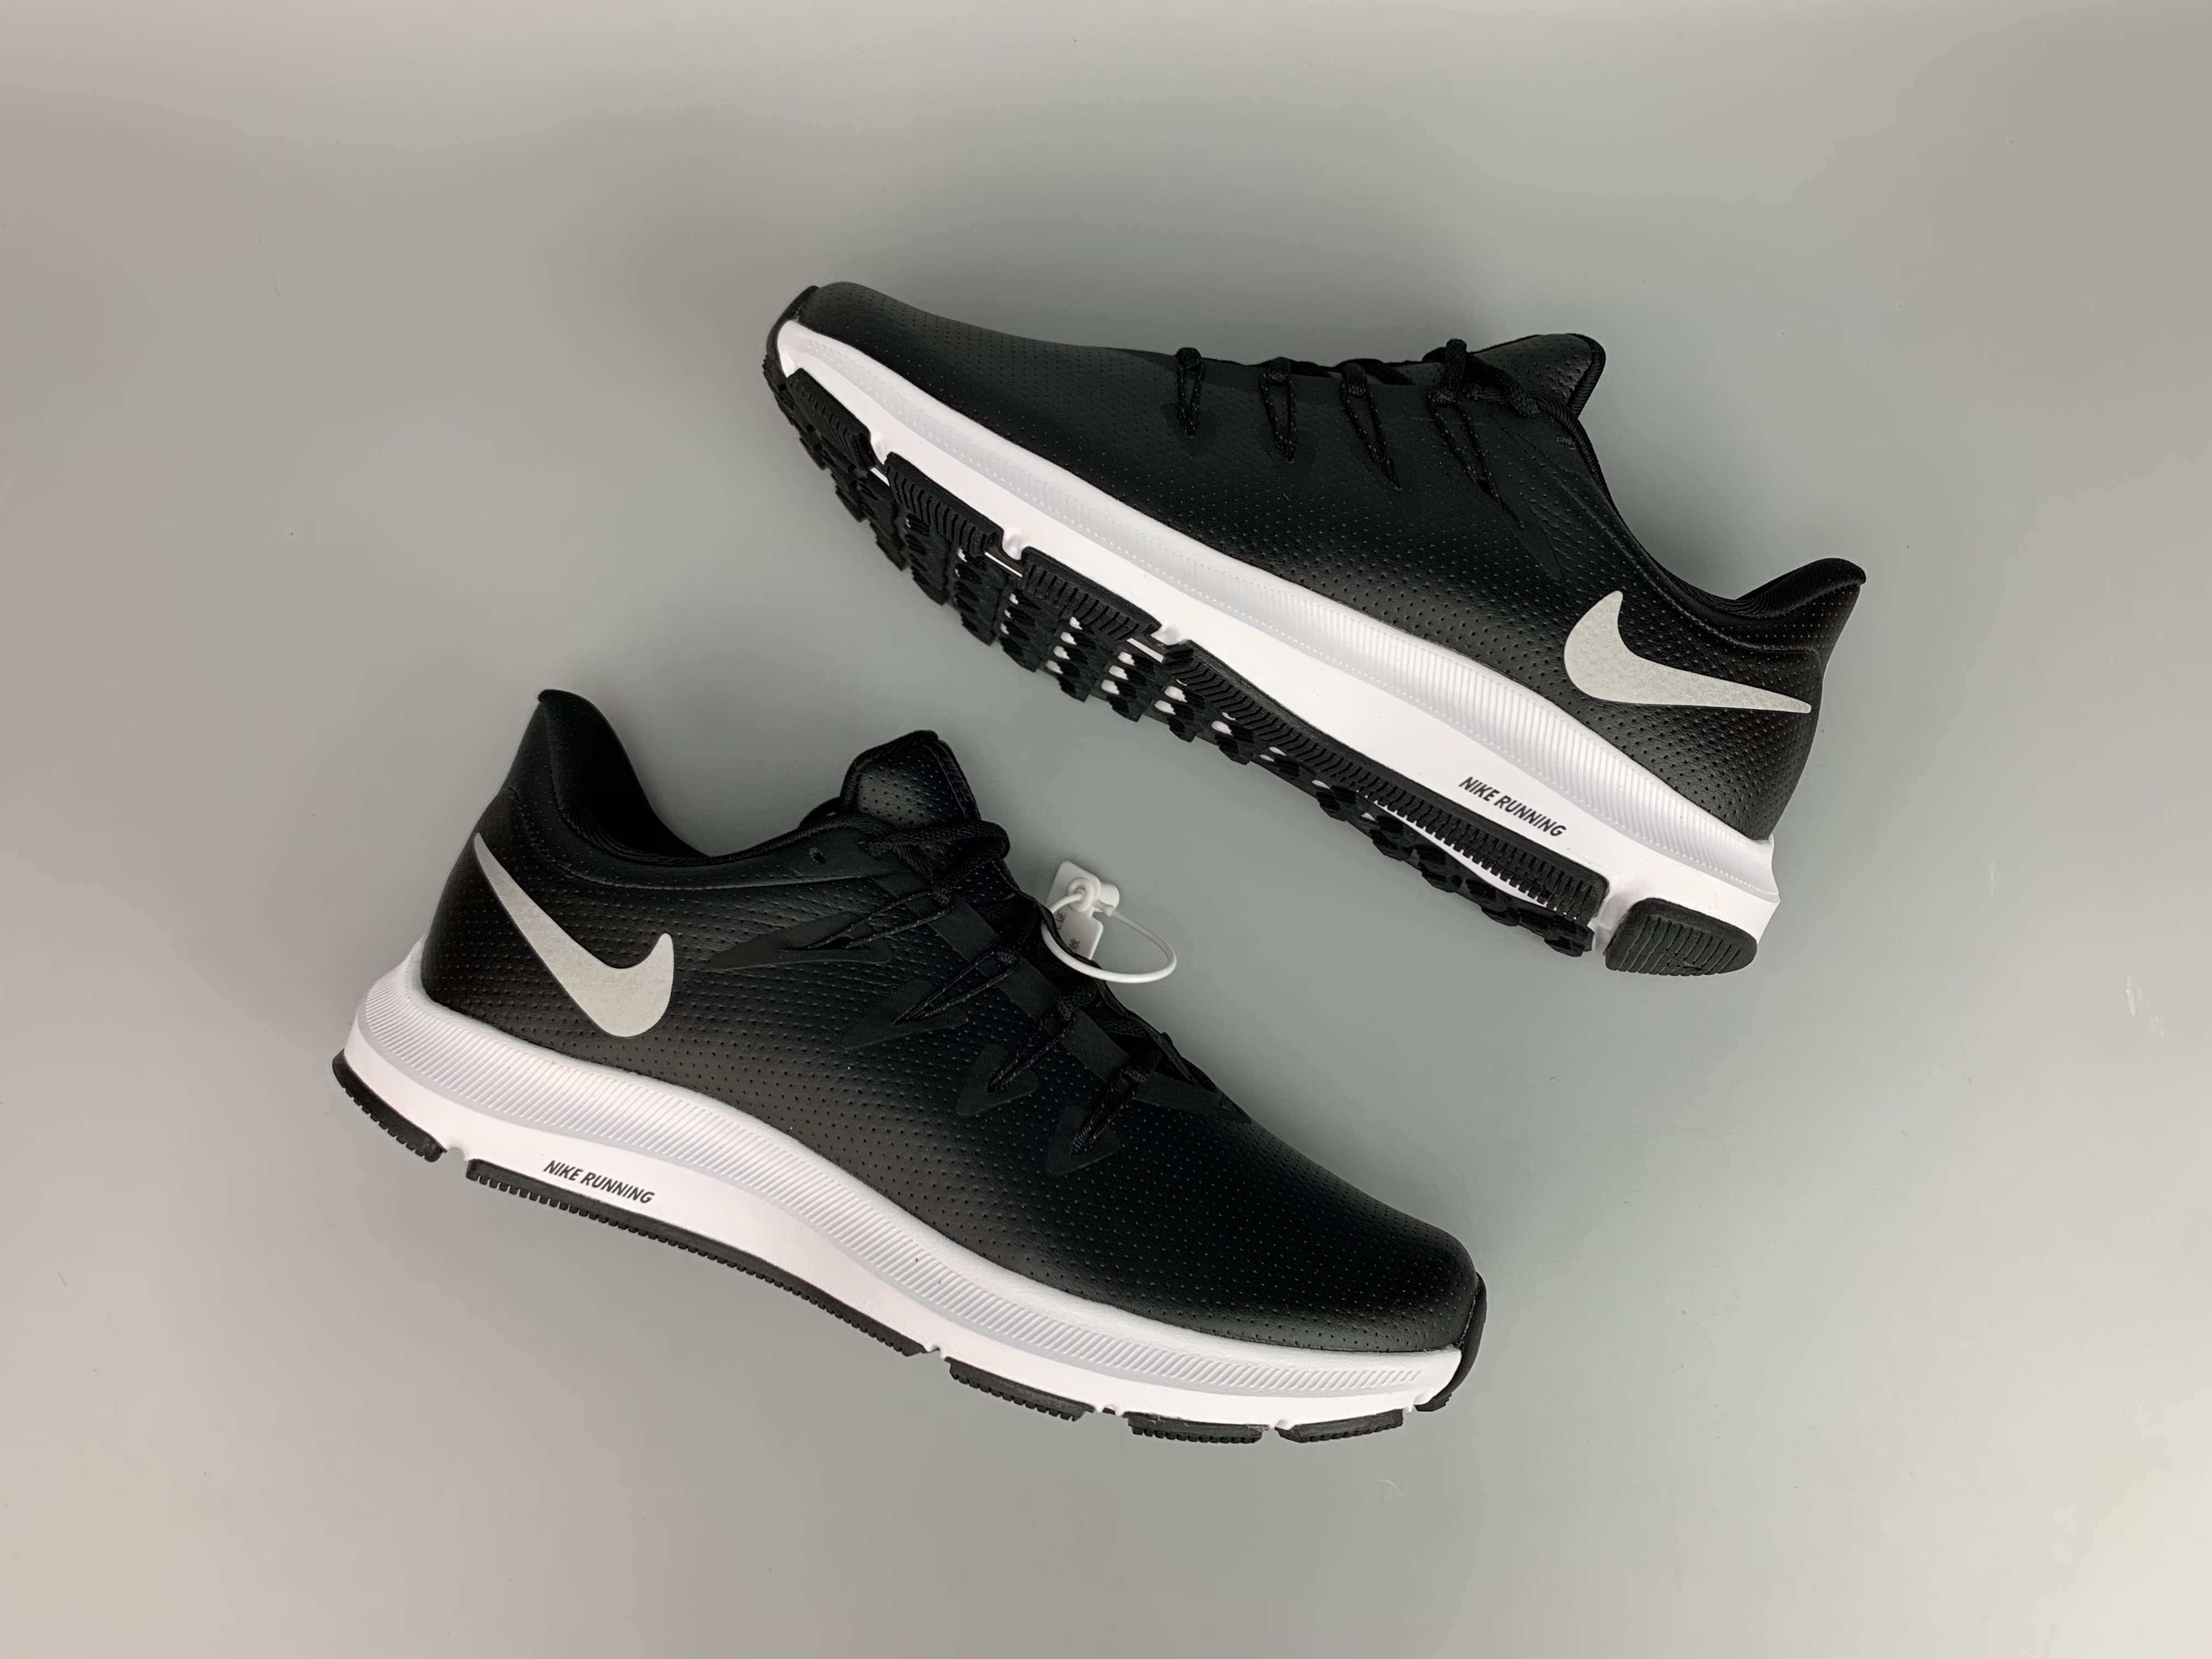 New Nike Quest 3 Black White Shoes For Women